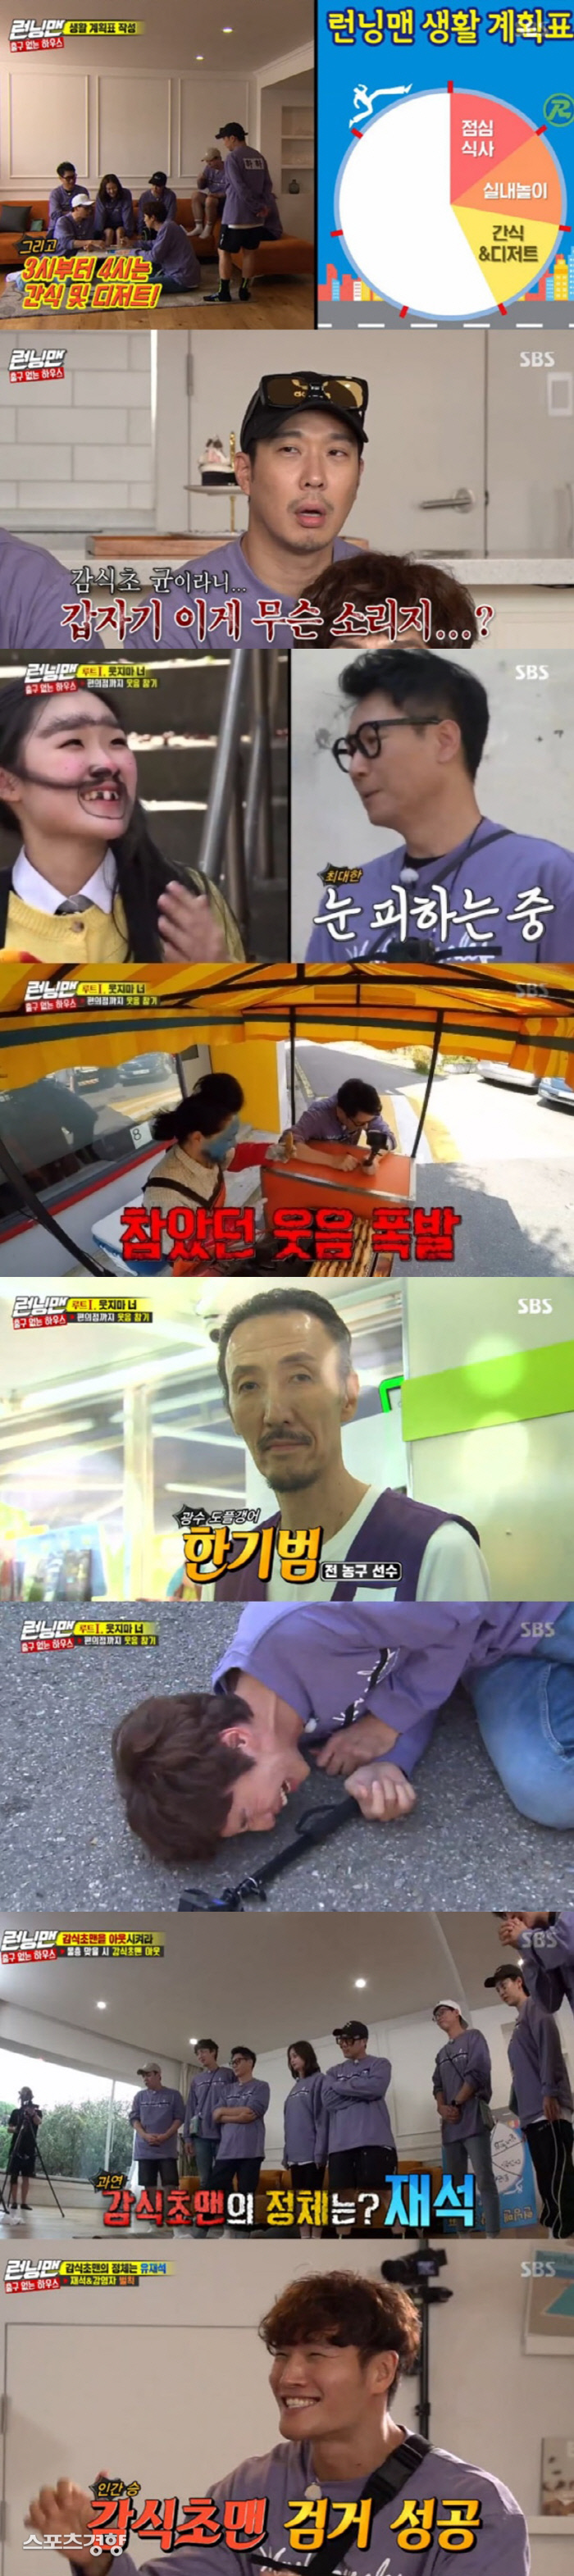 SBS Running Man kept the top spot in the same time zone of 2049 TV viewer ratings.According to Nielsen Korea, a TV viewer rating research institute, Running Man, which was broadcast on the 20th (Sun), recorded 4% of the 2049 target TV viewer ratings, which is an important indicator of major advertising officials, higher than last week (based on the second part of the Seoul metropolitan area, the highest TV viewer ratings per minute soared to 7.4%.The broadcast was featured in House Without Outlets, and the previous-class laughter was allowed to endure.The crew asked the members to take a picture from 12:00 to 6:00 pm at home, and the members were immersed in the life plan without knowing the English language.The cause of this is the rapid spread of persimmon vinegar, which is the cause of the loss of emotions and appetite, and all of which become initialized, he warned on the TV in the house.One of the members struggle to find the persimmon vinegar man along with the execution of the life plan table was unexpected tolerance of hardship laughter.Ji Suk-jin went out of the house with a cheerful easy but collapsed in the emergence of Yondu, infecting the persimmon vinegar, and spreading the Jeon So-min name tag.Lee Kwang-soo and Kim Jong-kook also stepped out on Top Model.Kim Jong-kook succeeded in laughing and winning human hints, and Lee Kwang-soo also had the success of the mission, but it collapsed in the appearance of basketball player Han Ki-bum.Yang Se-chan also failed to get the commission.Yoo Jae-Suk, along with Haha, made the Top Model on the paparazzi mission If you get shot, you die.The moment the two succeeded in mission, Ji Suk-jin spread the persimmon vinegar to Lee Kwang-soo and was infected to Song Ji-hyo.Kim Jong-kook was successful in arresting Yoo Jae-Suk as a persimmon vinegar man.The scene was the best TV viewer rating per minute with 7.4%.All penalties were confirmed, except for Kim Jong-kook and Haha, and two members who were identified by the two members.On the other hand, SBS Running Man is broadcast every Sunday at 5 pm.